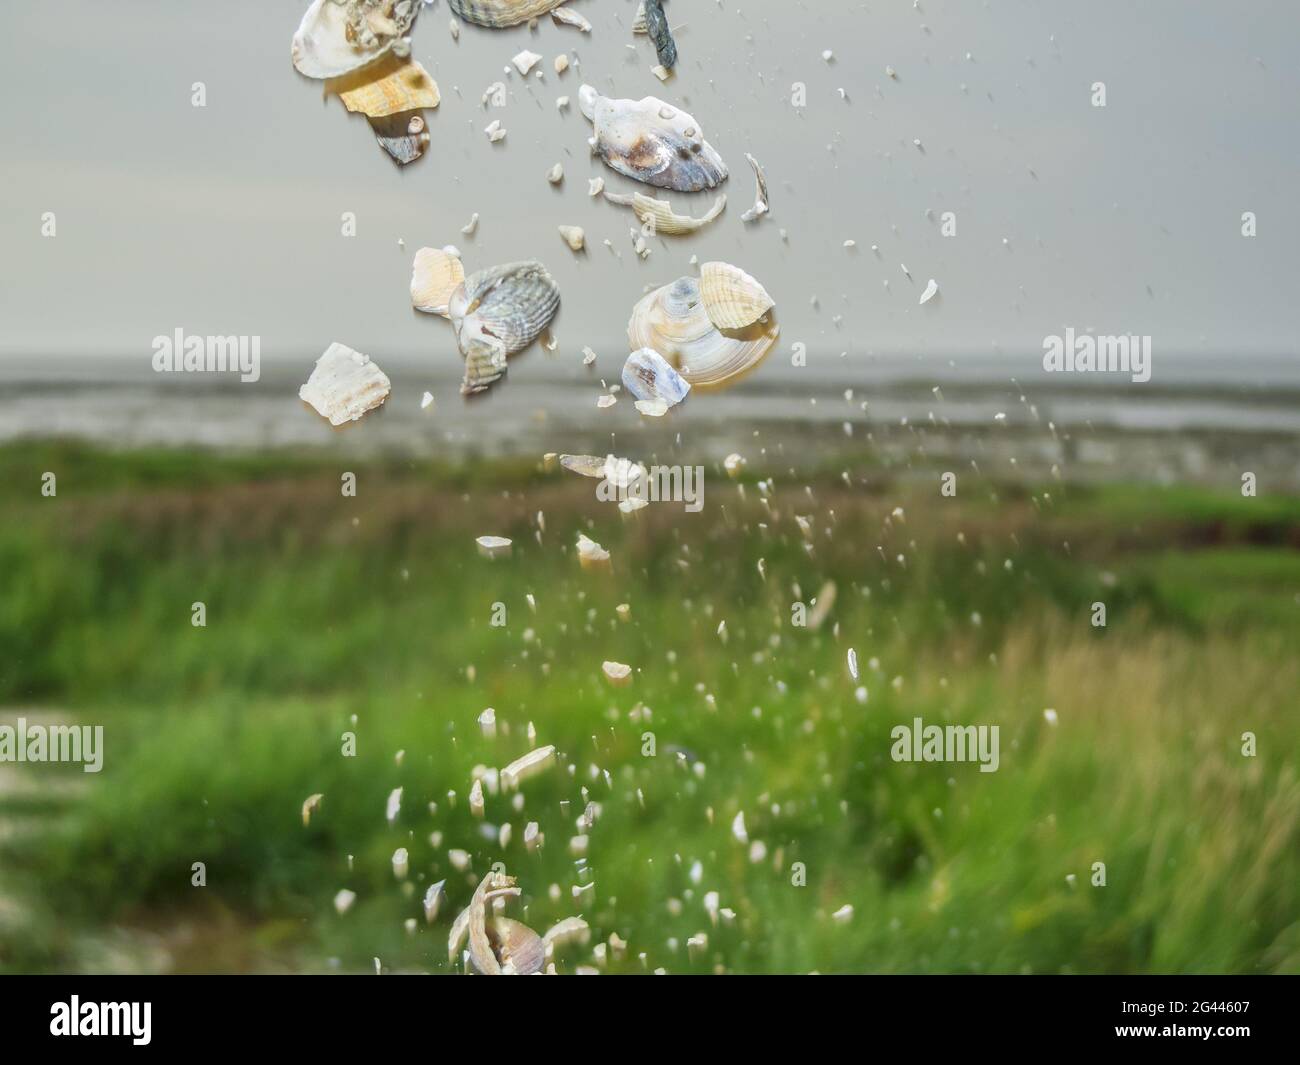 Falling clams in the salt marshes Stock Photo